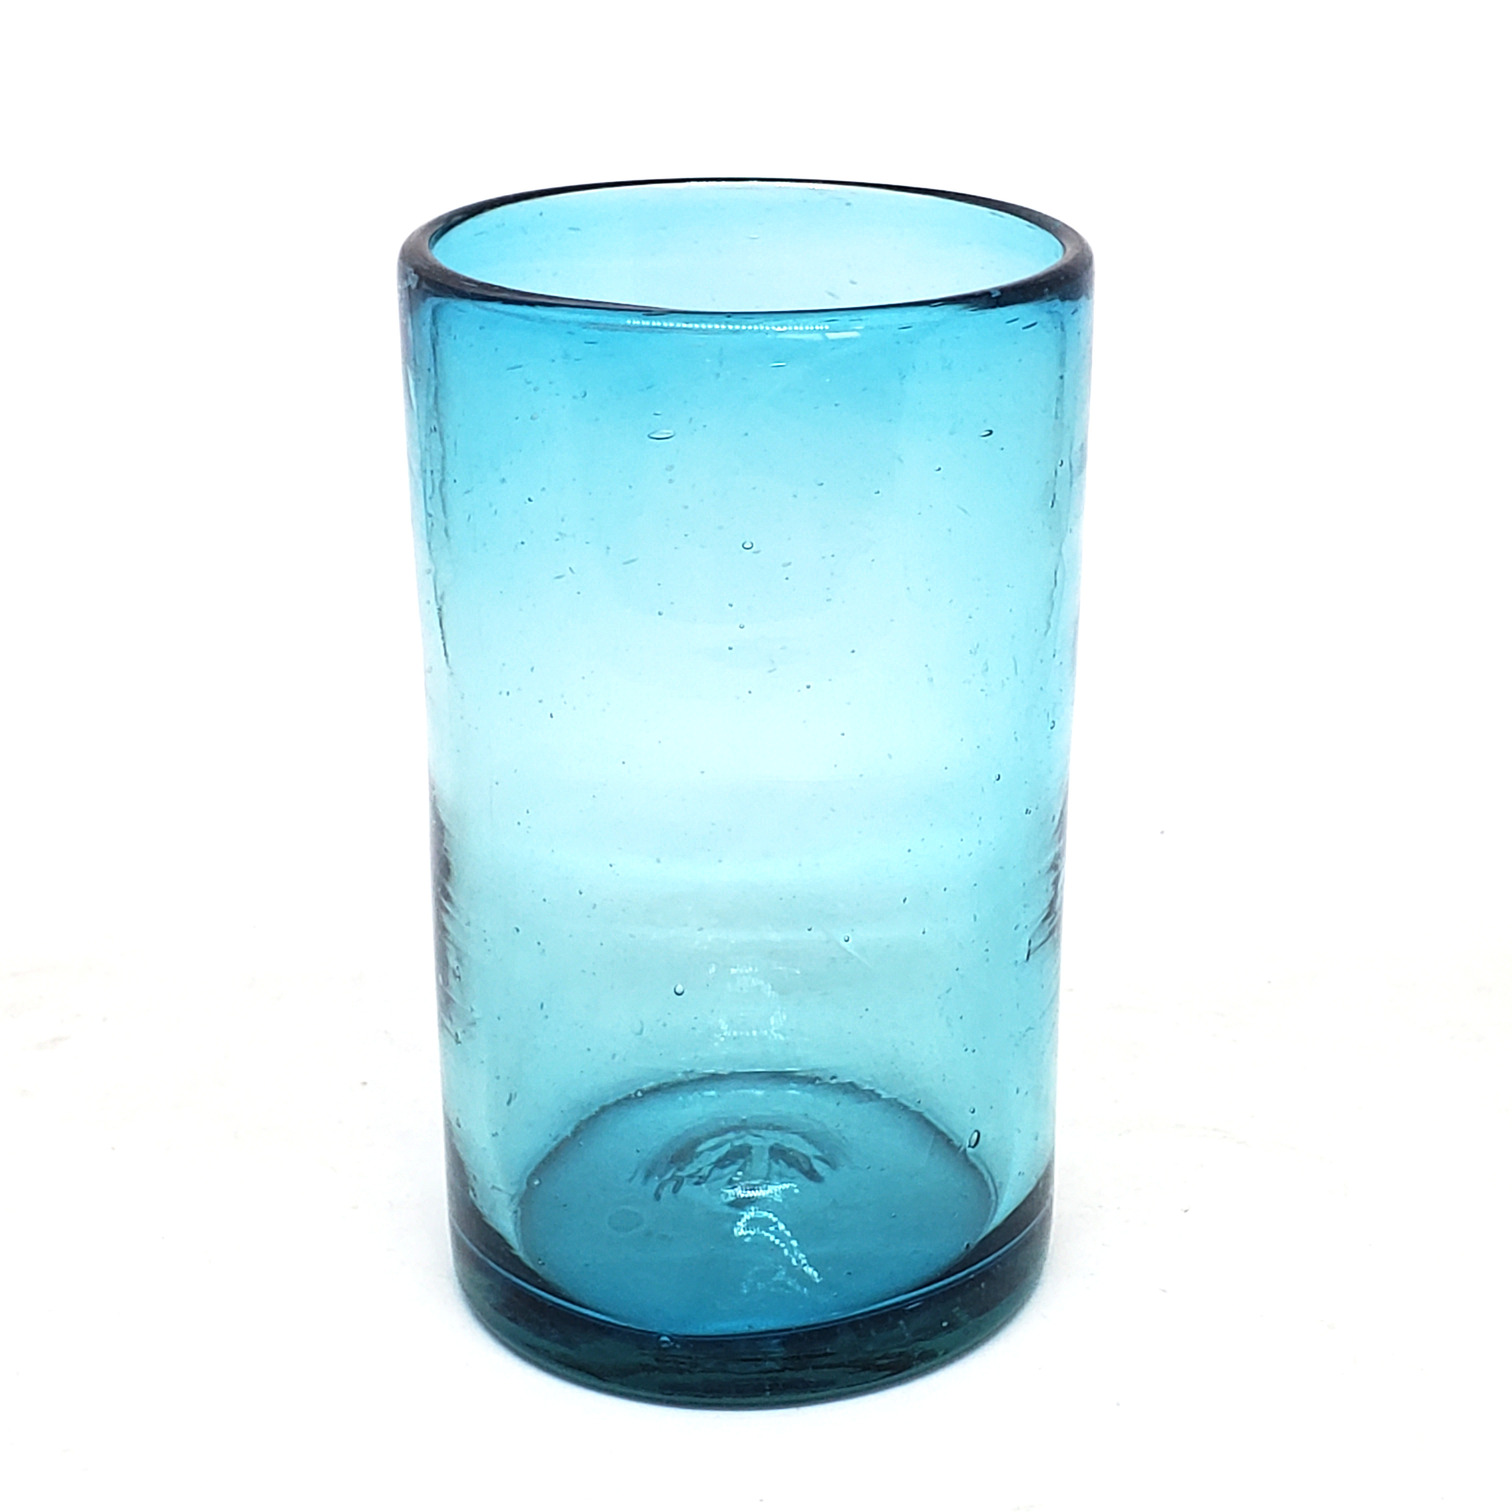 Wholesale Mexican Glasses / Solid Aqua Blue 14 oz Drinking Glasses  / These handcrafted glasses deliver a classic touch to your favorite drink.